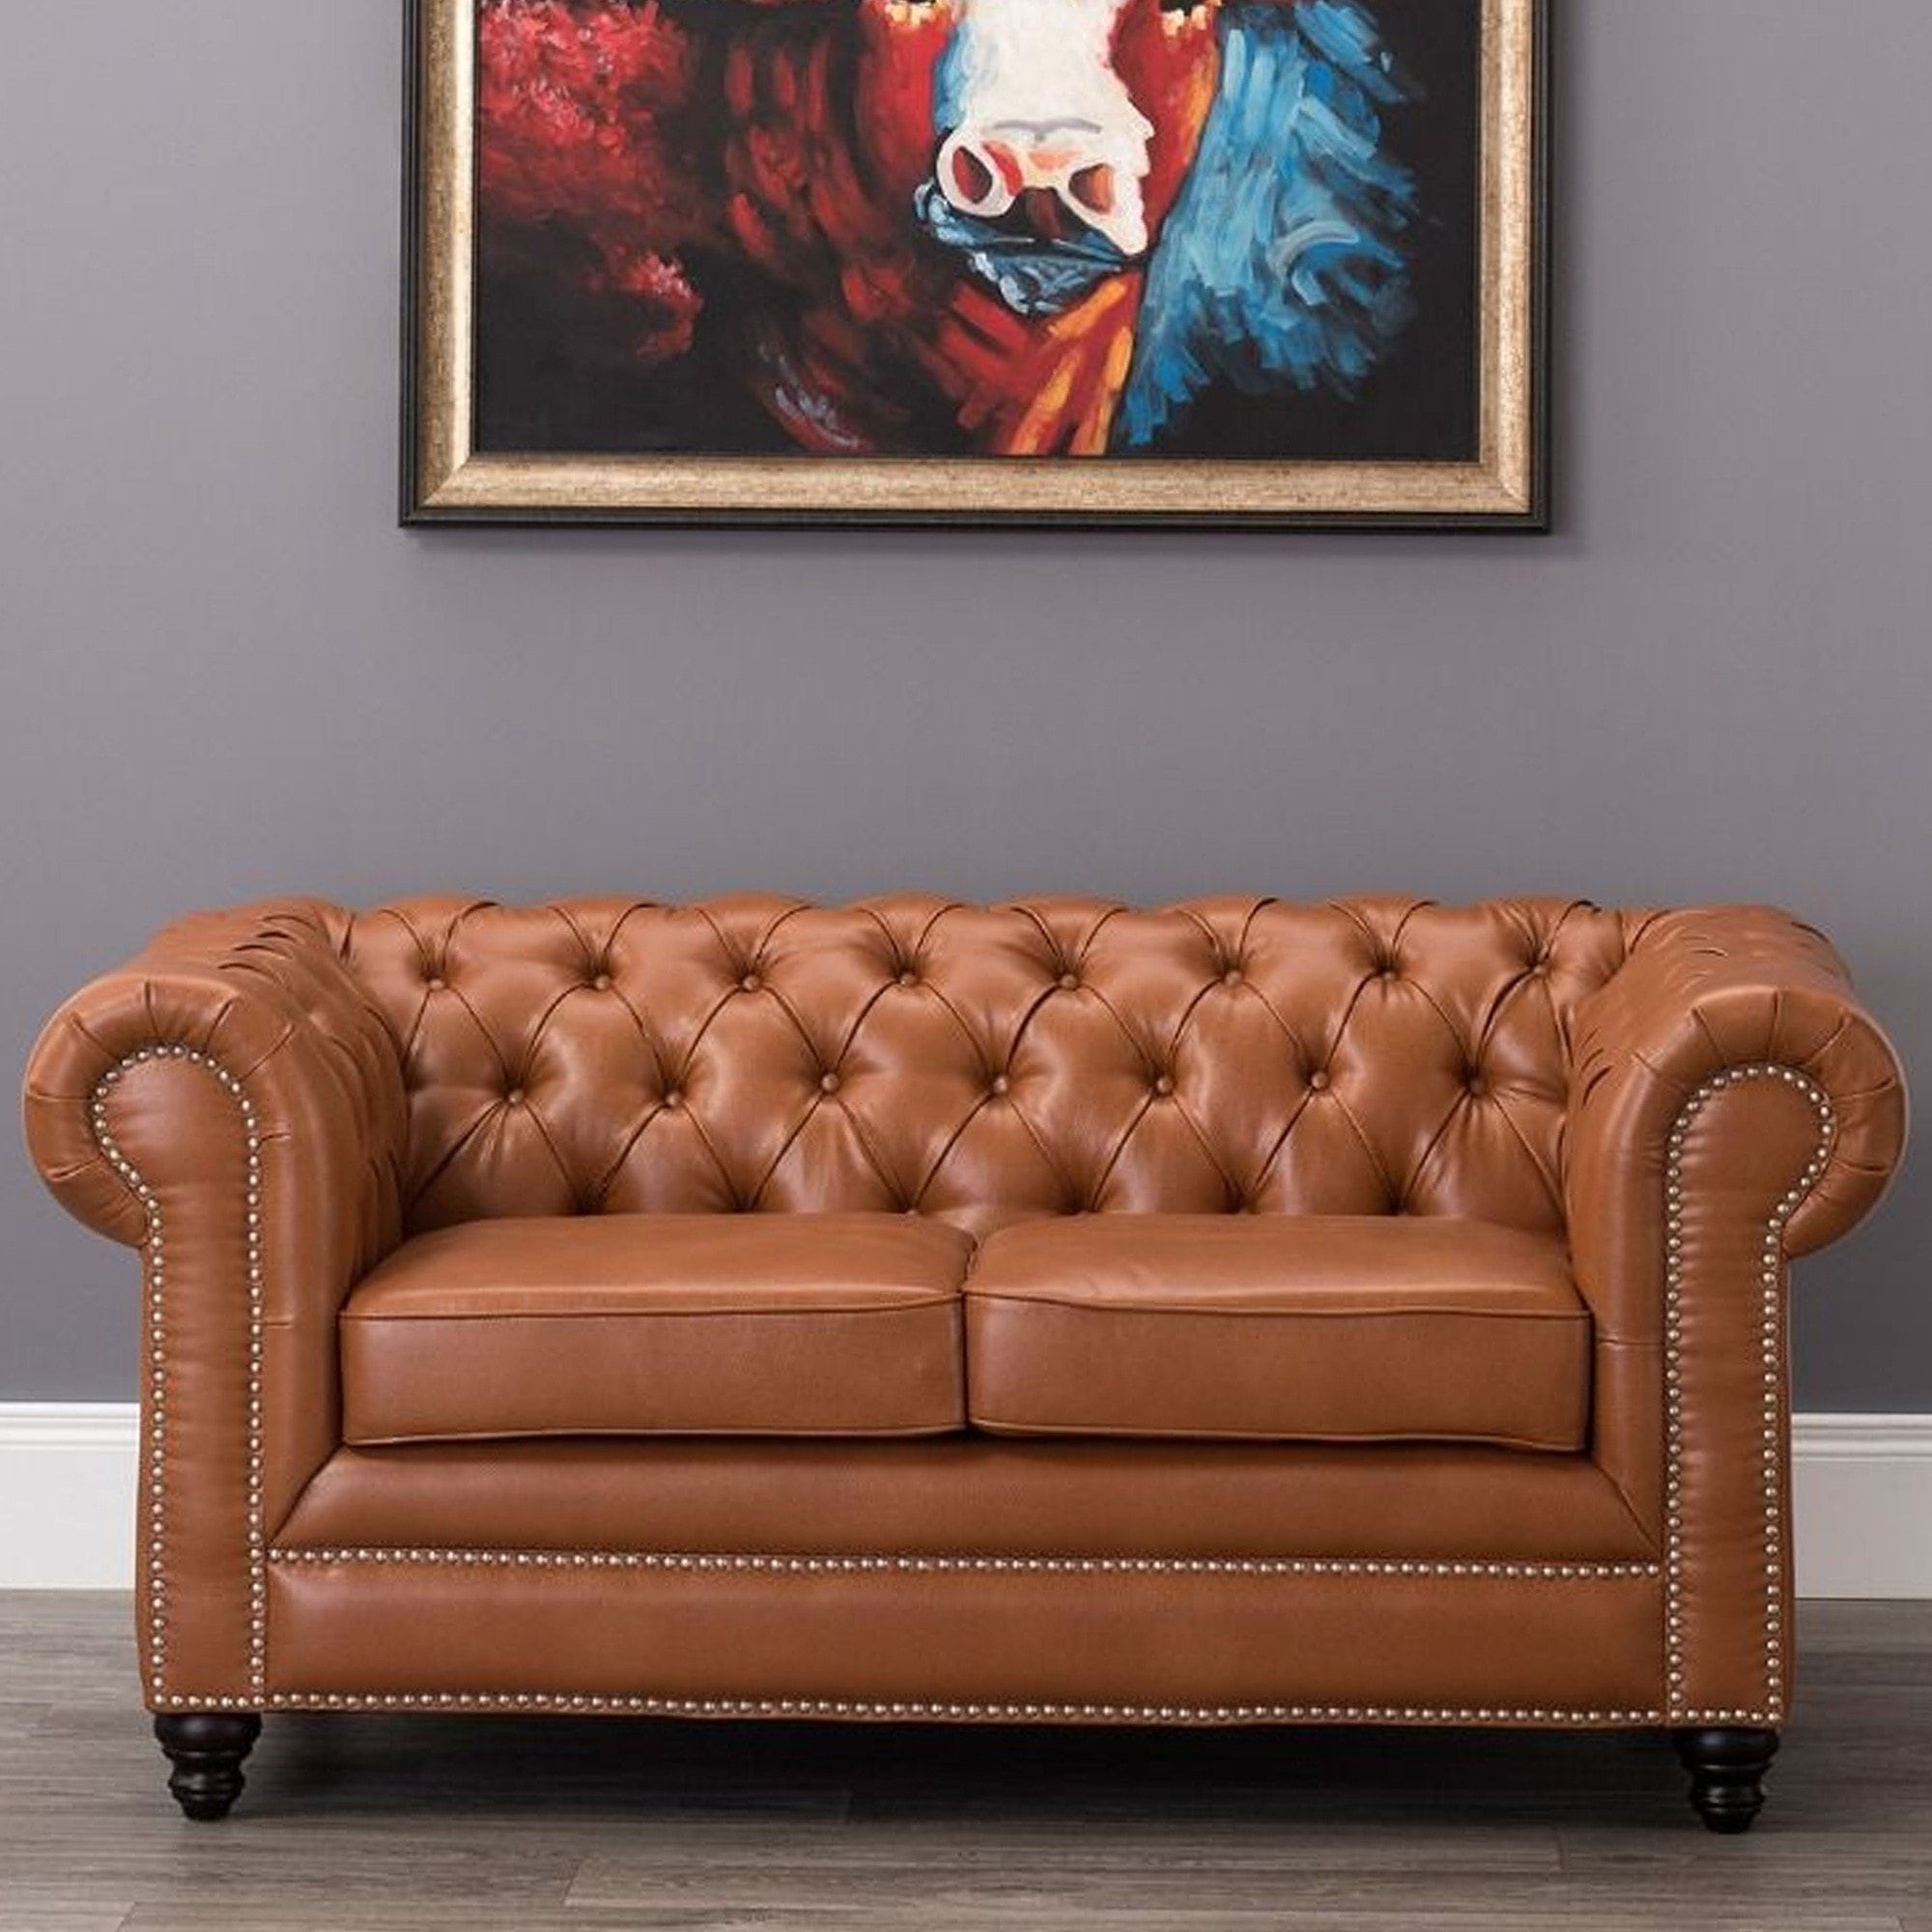 Faux Leather Chesterfield 2 Seater Sofa Tan | Tan Chesterfield Sofa Regarding Chesterfield Sofas (View 17 of 20)